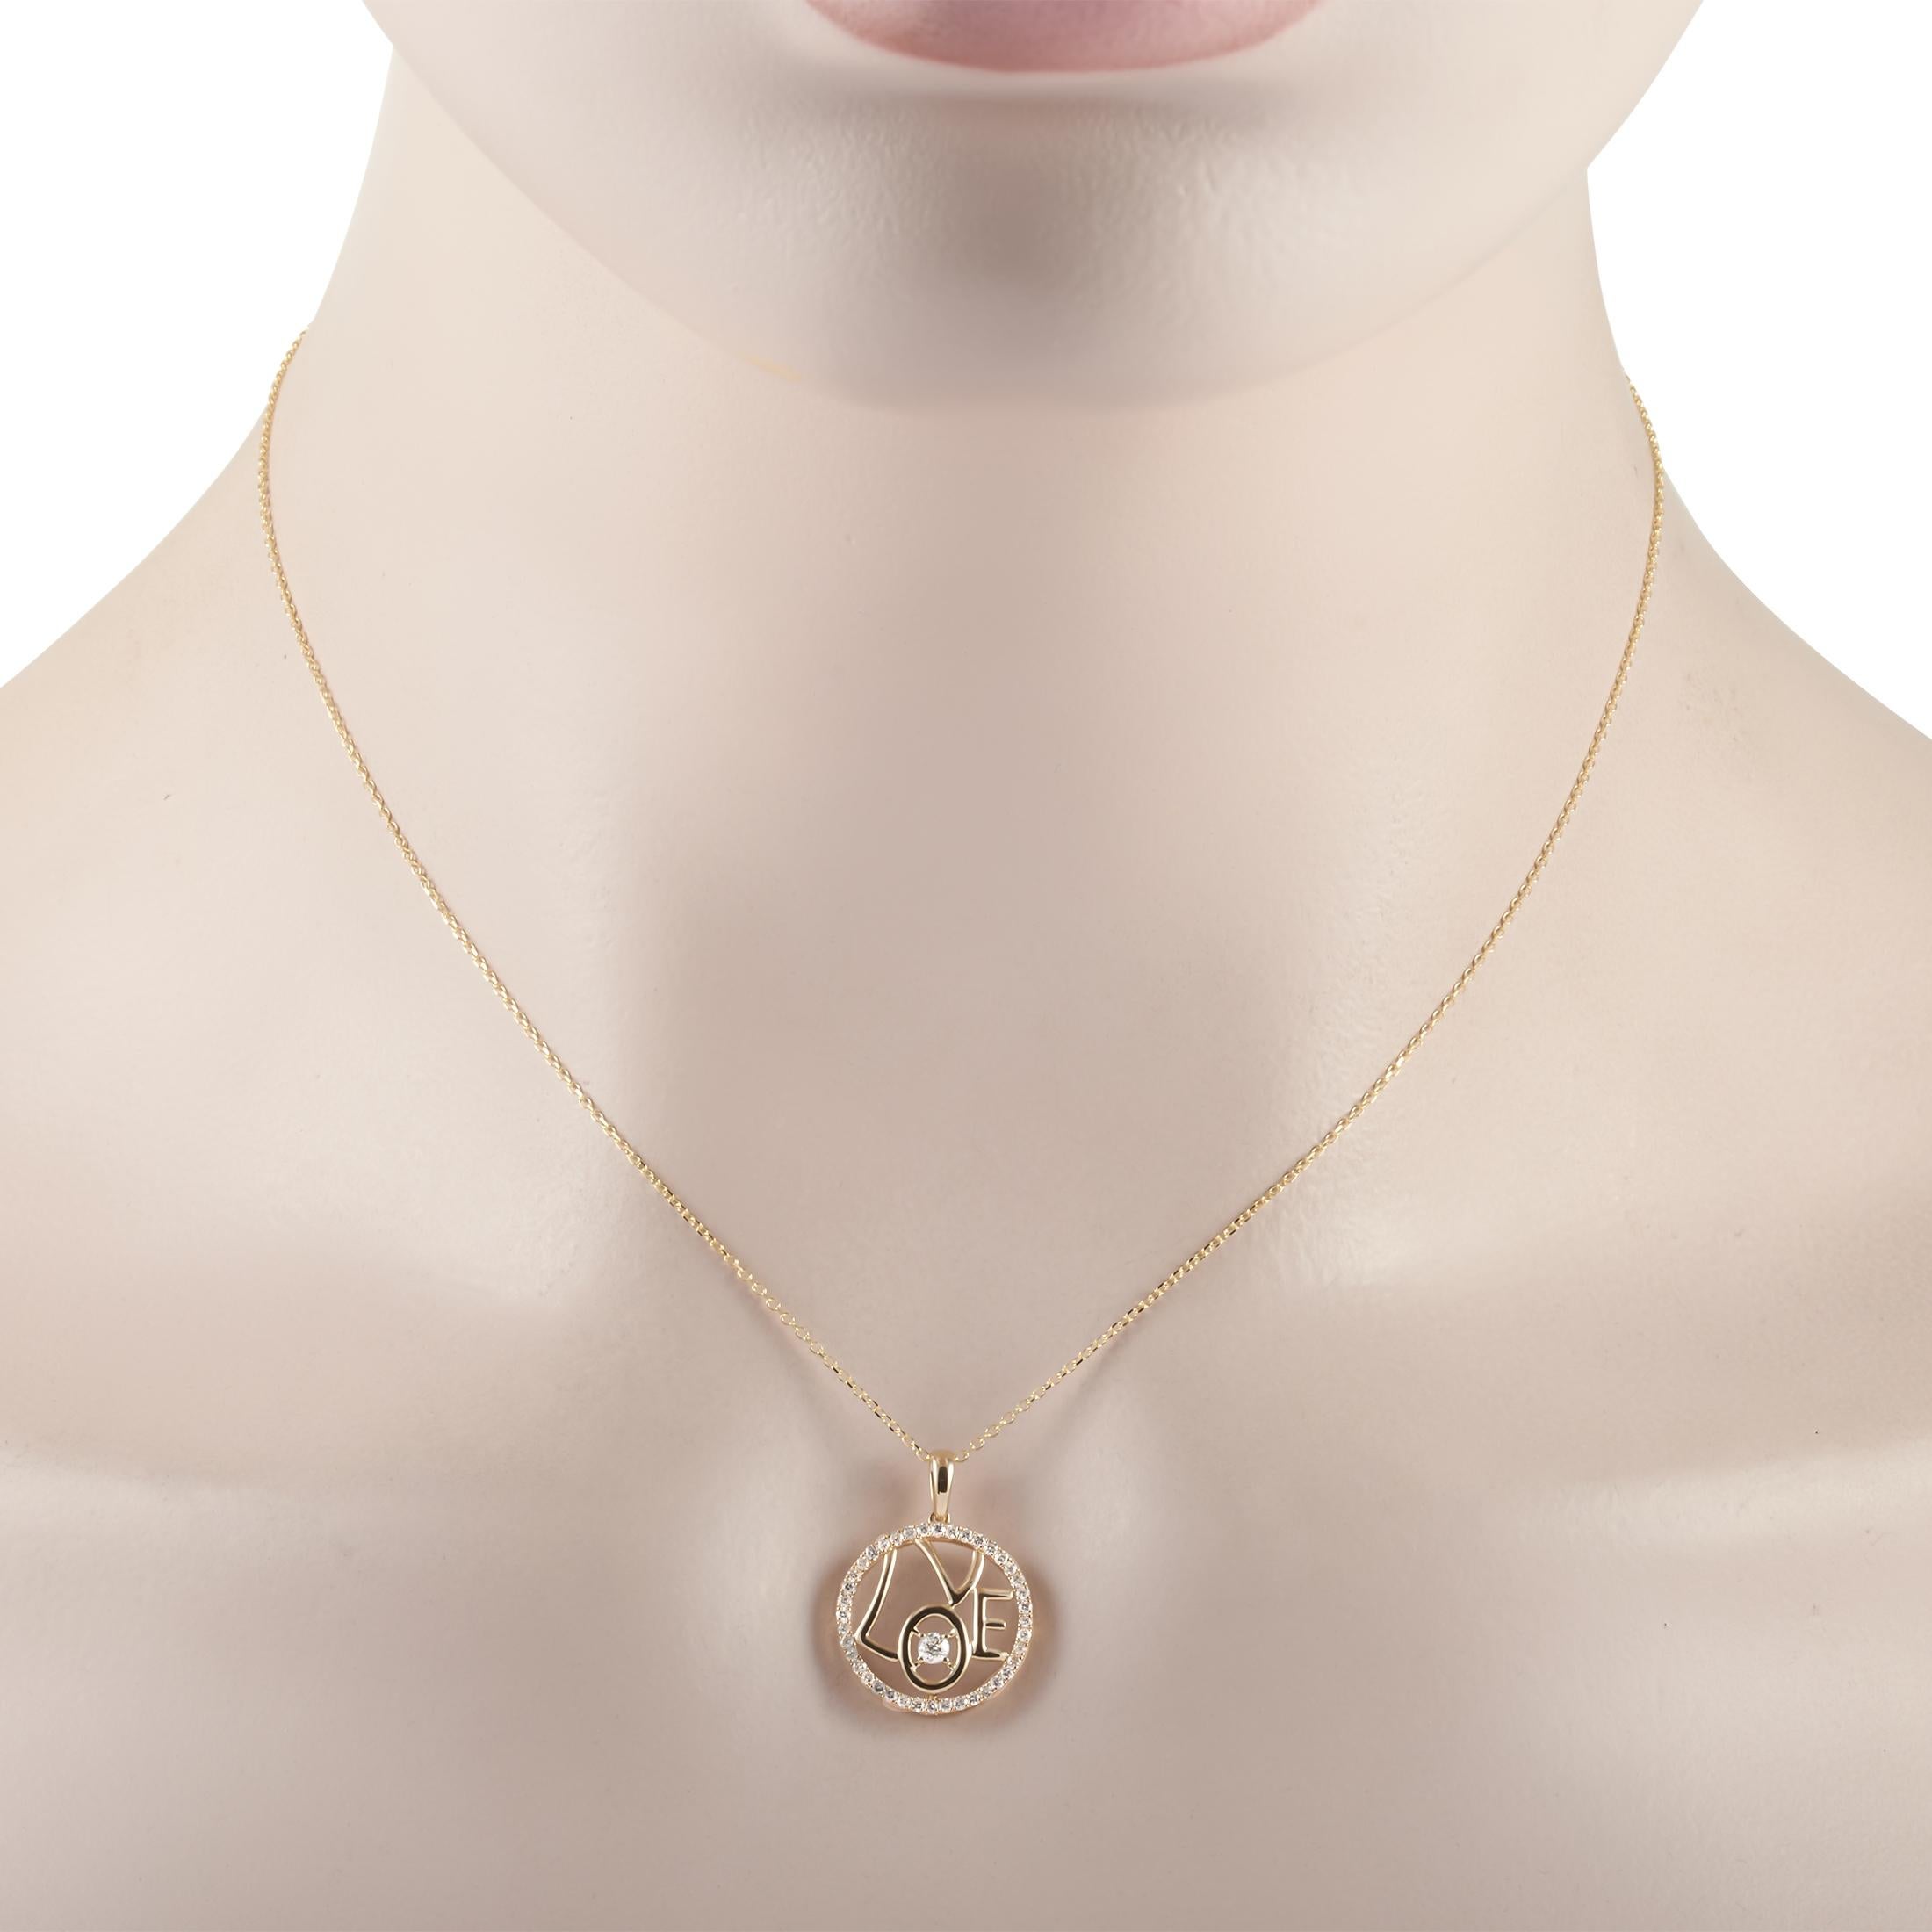 This LB Exclusive necklace is made of 14K yellow gold and embellished with diamonds that amount to 0.30 carats. The necklace weighs 2.2 grams and boasts a 15” chain and a pendant that measures 0.88” in length and 0.63” in width.
 
 Offered in brand